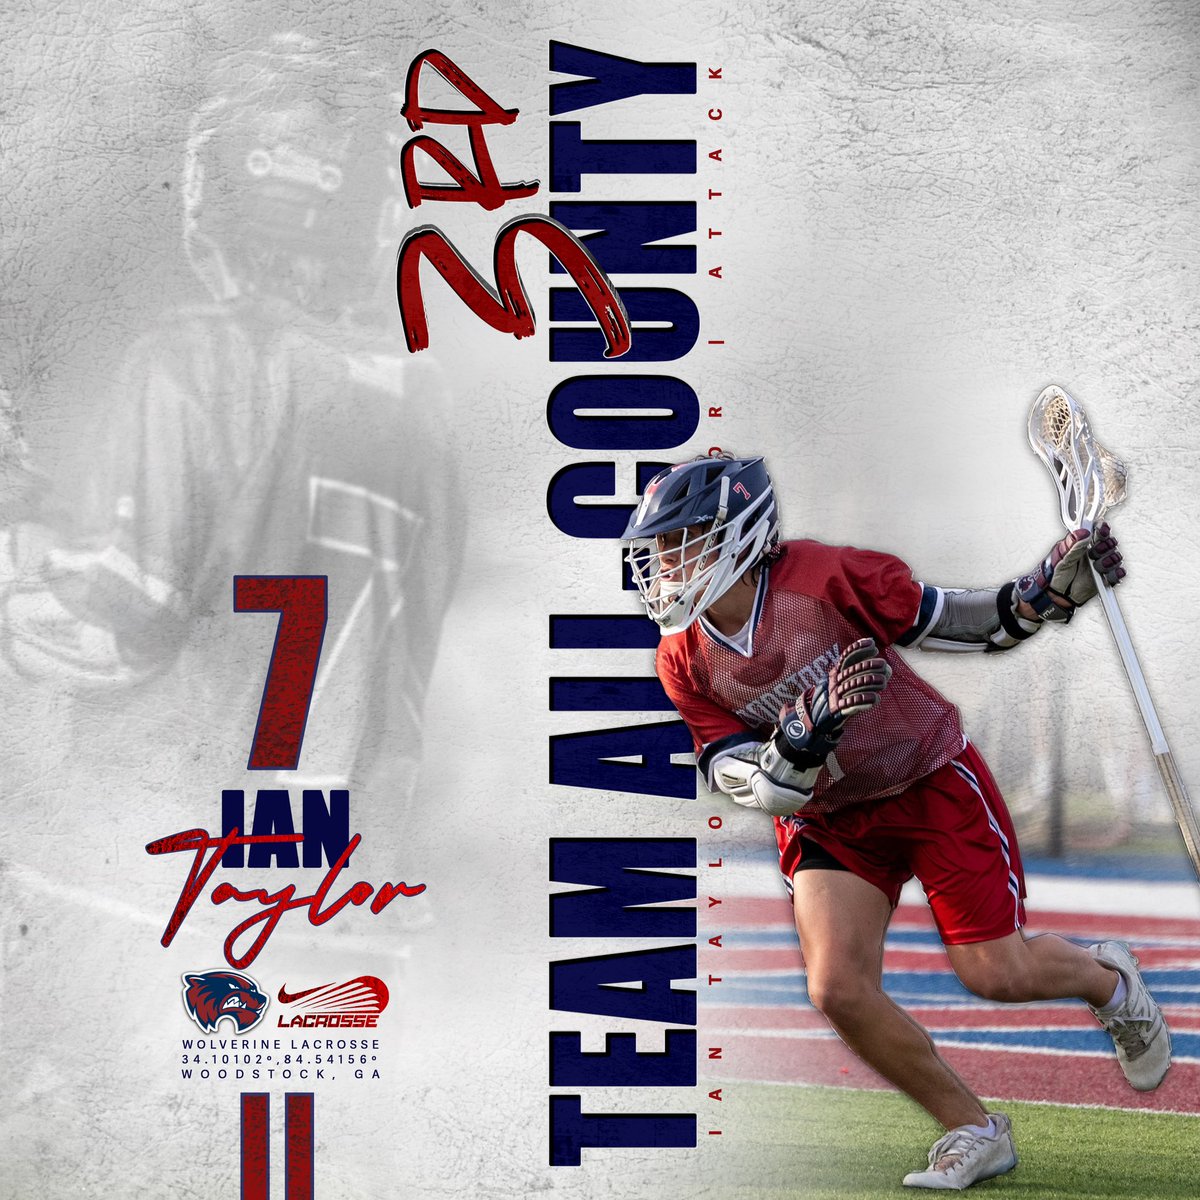 🥉 𝗔𝗟𝗟-𝗖𝗢𝗨𝗡𝗧𝗬 🥉 𝟯𝗿𝗱 Team All-County is selected by the lacrosse coaches from the entire county, with one of the toughest schedules! Ian Taylor was the cornerstone at X! . 5️⃣2️⃣ - Points 1️⃣8️⃣ - Goals 3️⃣4️⃣ - Assists . #lax #ghsa #1woodstock #lax4life #laxlife